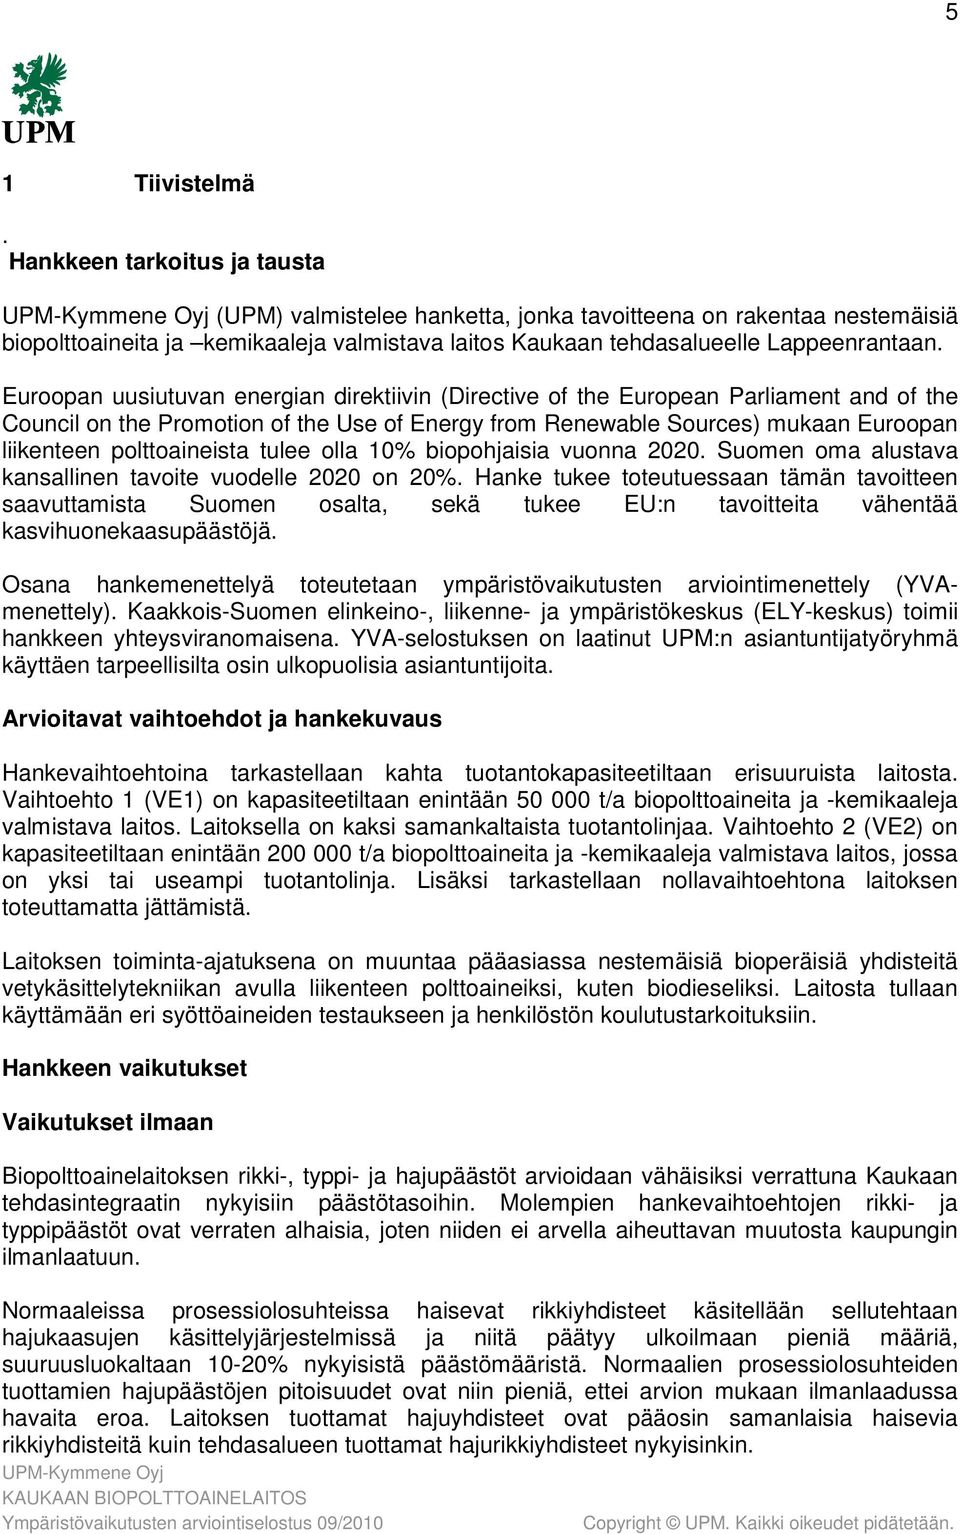 Euroopan uusiutuvan energian direktiivin (Directive of the European Parliament and of the Council on the Promotion of the Use of Energy from Renewable Sources) mukaan Euroopan liikenteen